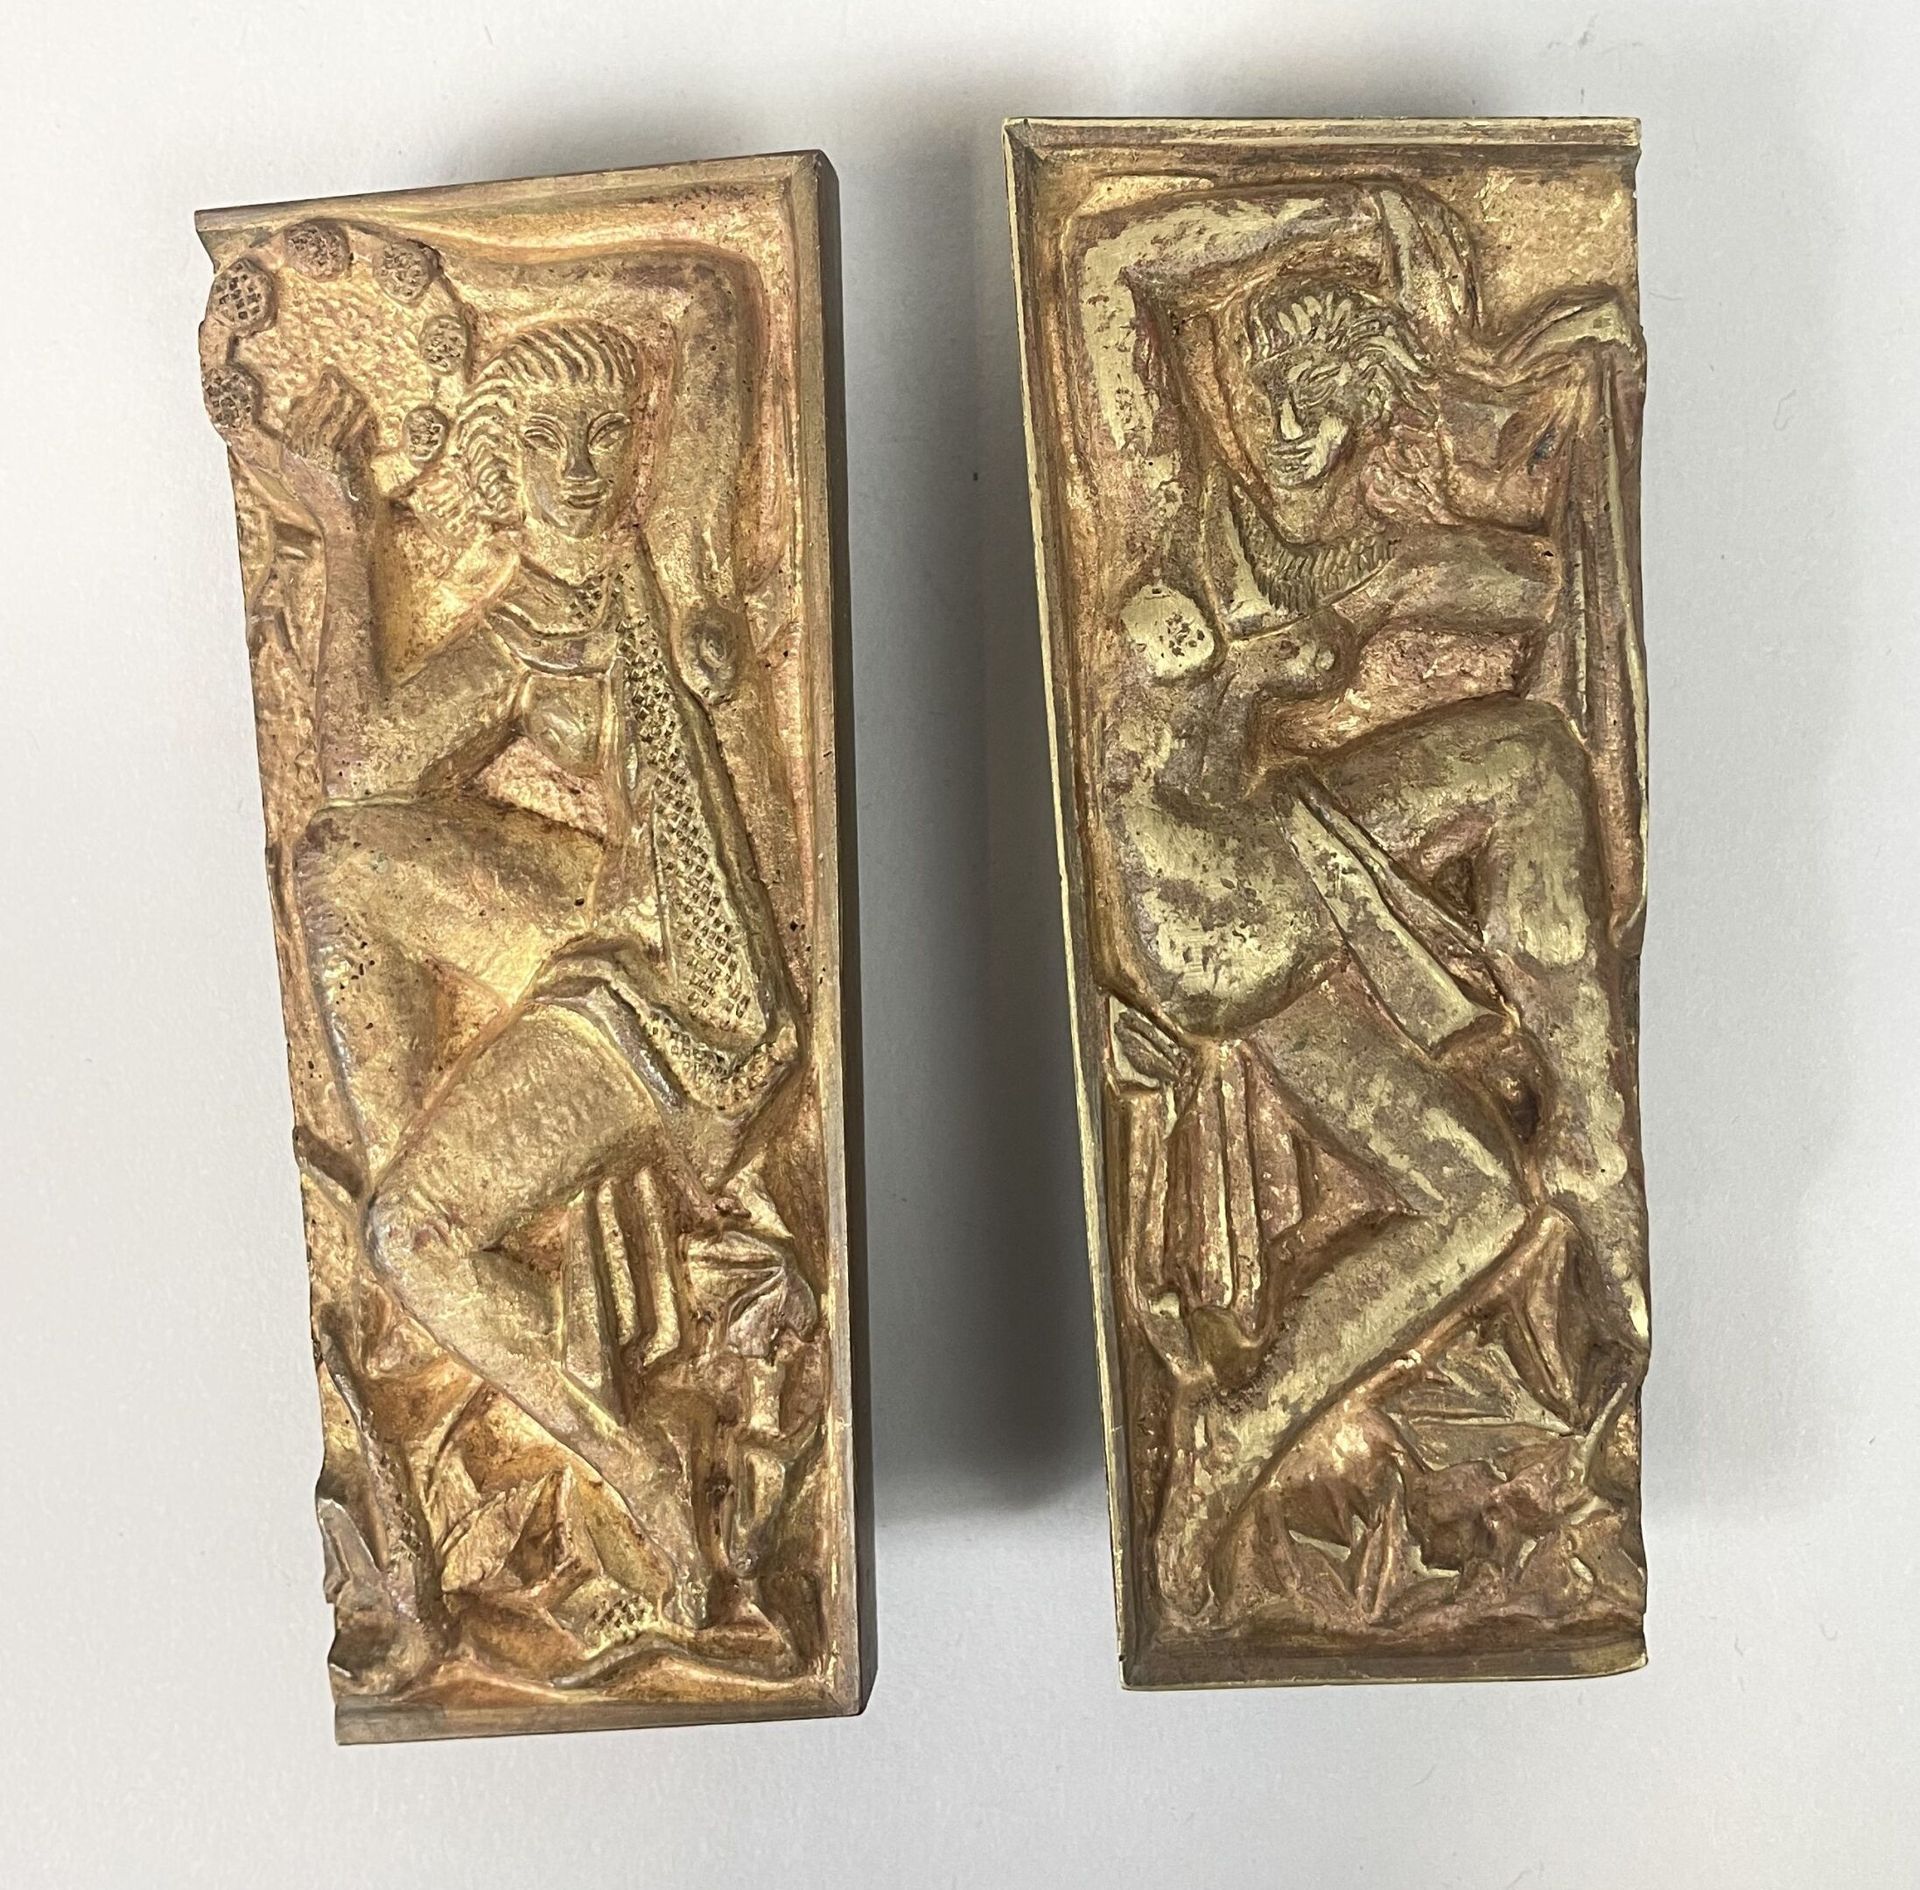 Null Maurice JALLOT (1900-1971)
Pair of bronze handles decorated with dancers. 
&hellip;